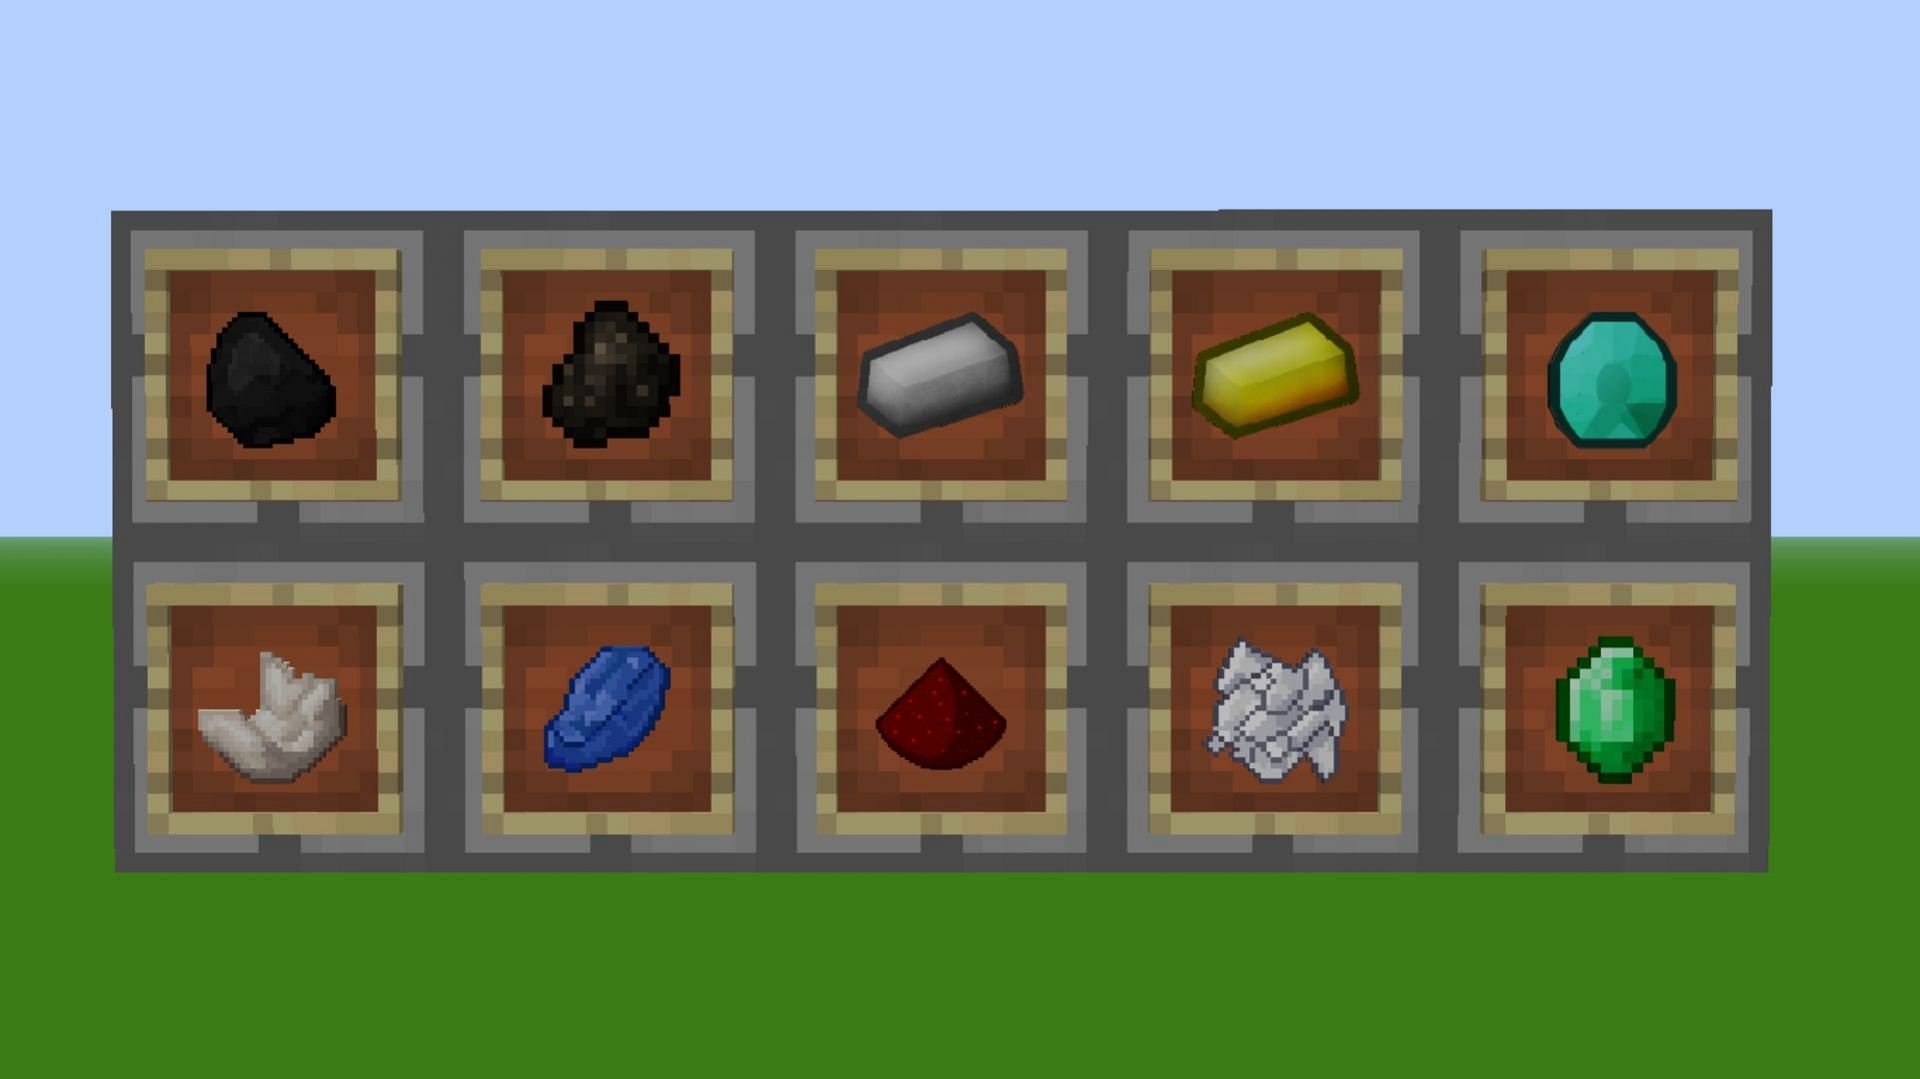 MoreFPS Pack also simplifies the textures and increases FPS in Minecraft 1.19 (Image via CurseForge)